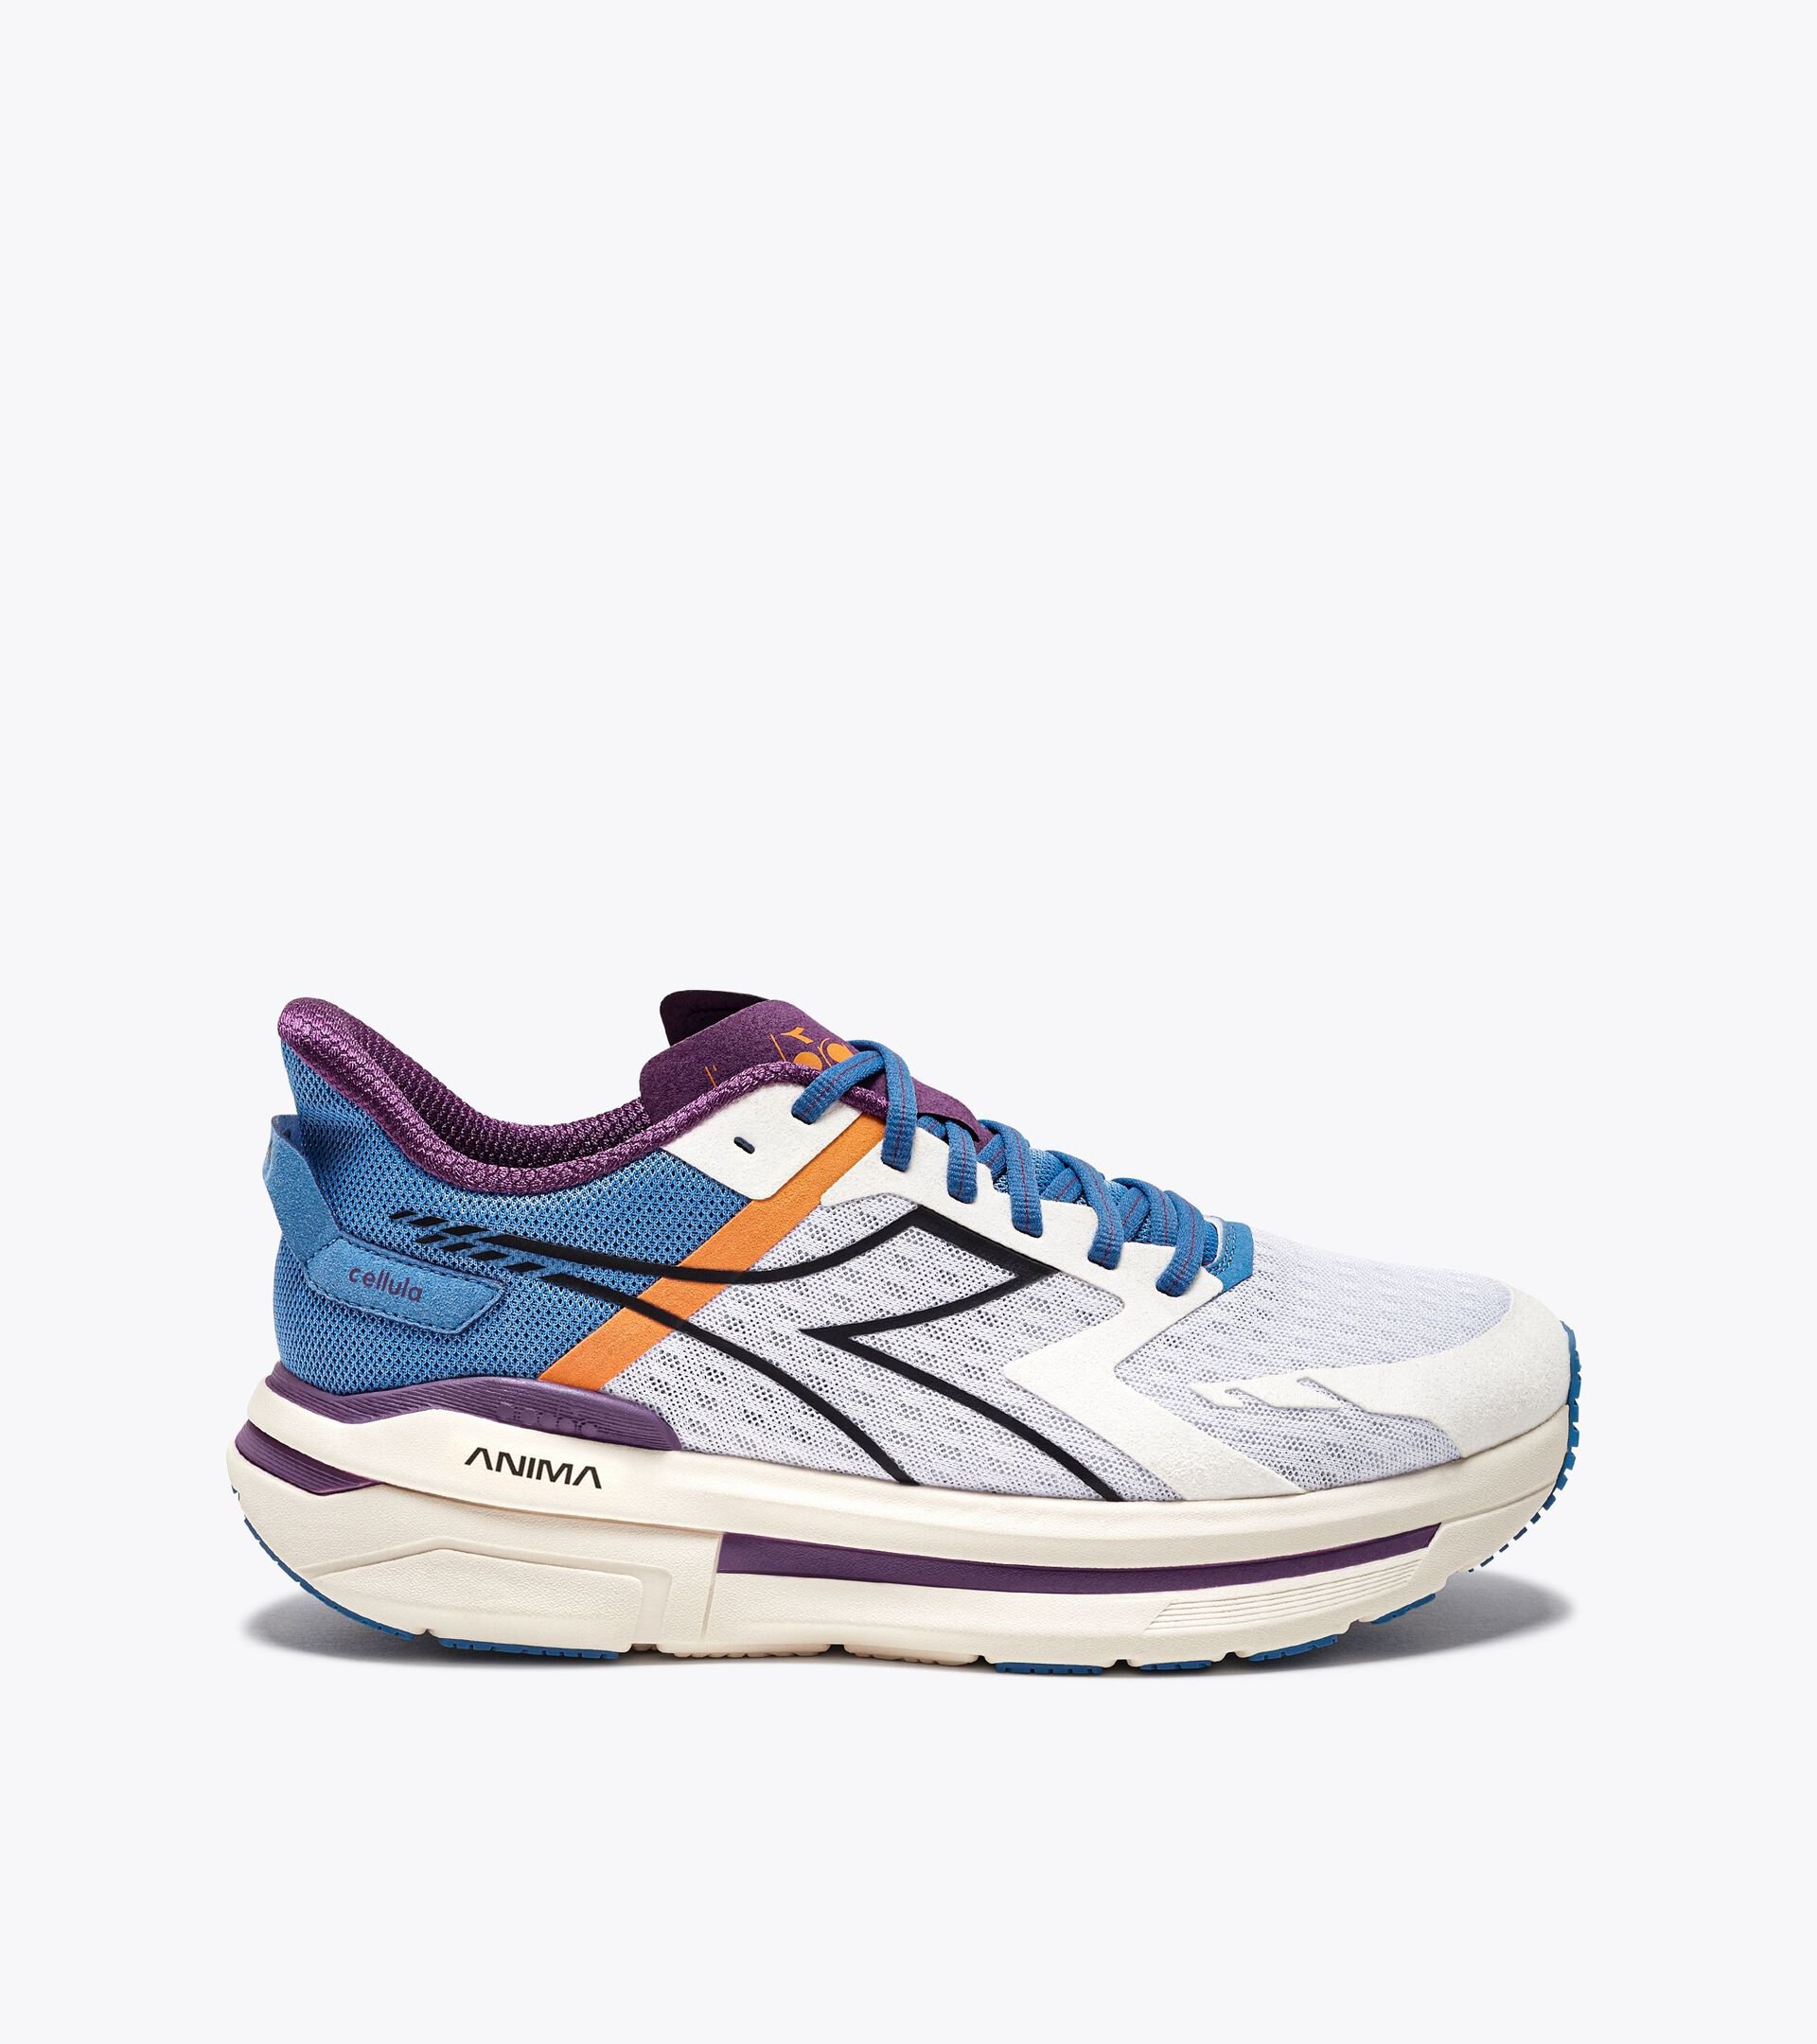 Running shoe - Comfort and stability - Men's CELLULA WHT/PACIFIC COAST/SUNSET PRPL - Diadora